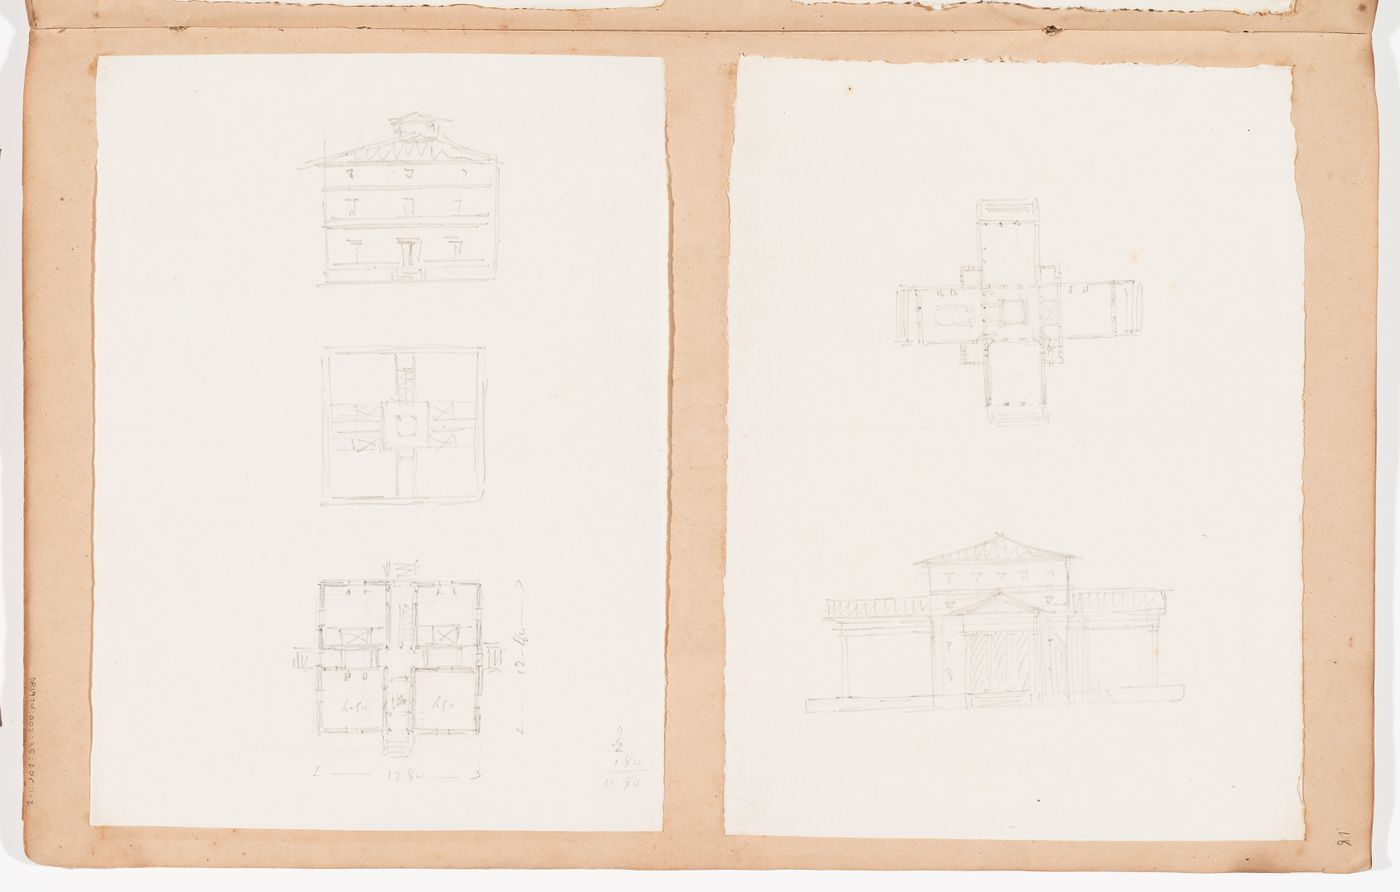 Sketch plans and elevations for country houses; verso: Perspective and plans for renovations for the house at Domaine de La Vallée